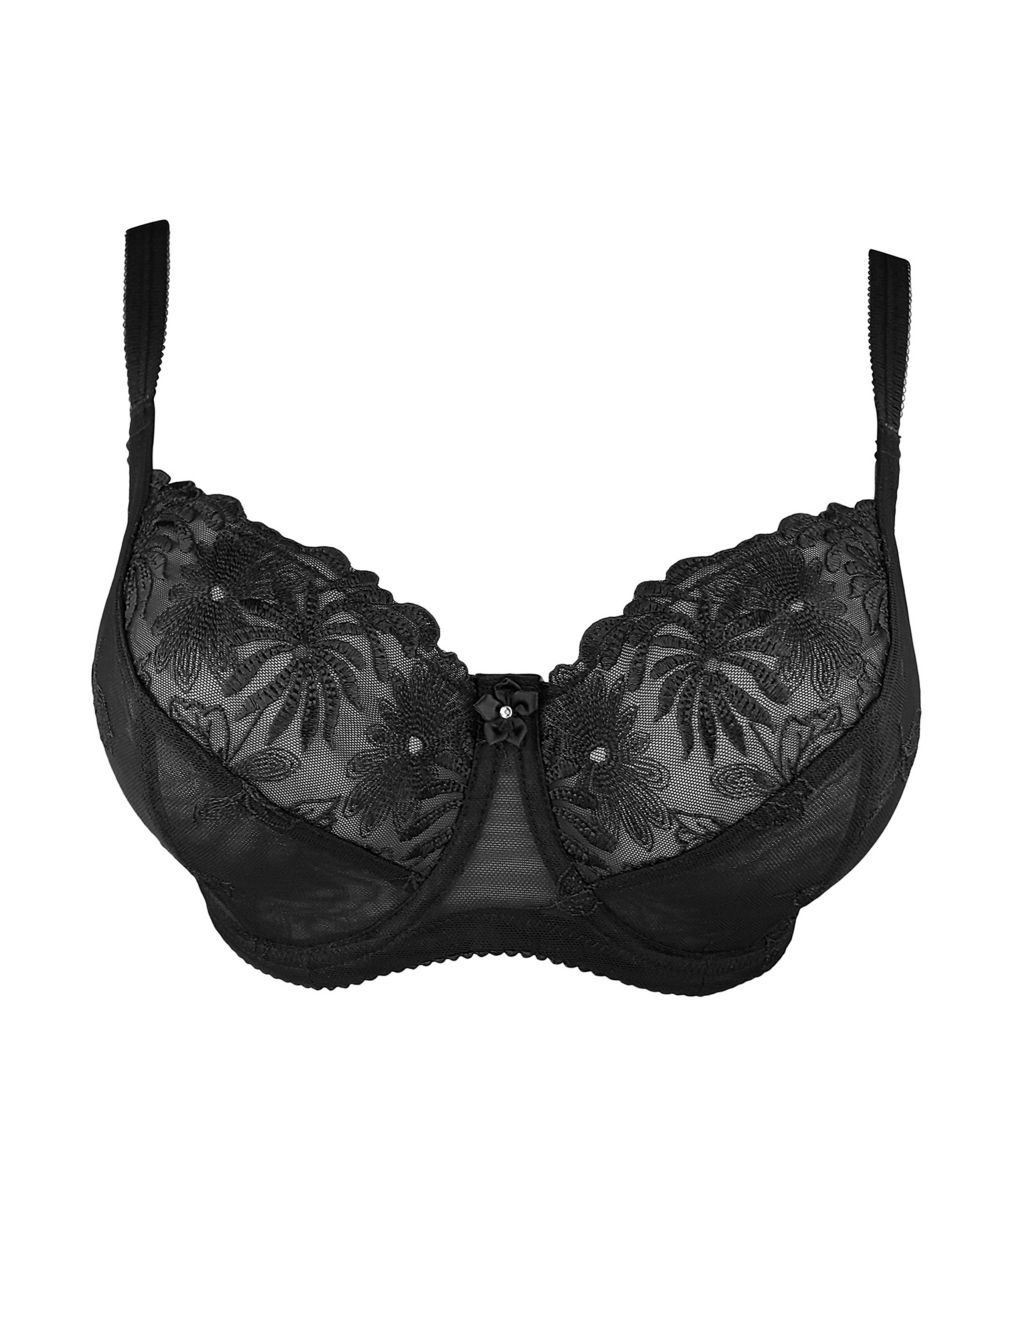 Cleo Lexi Molded Cup Bra in Black FINAL SALE NORMALLY $56 - Busted Bra Shop